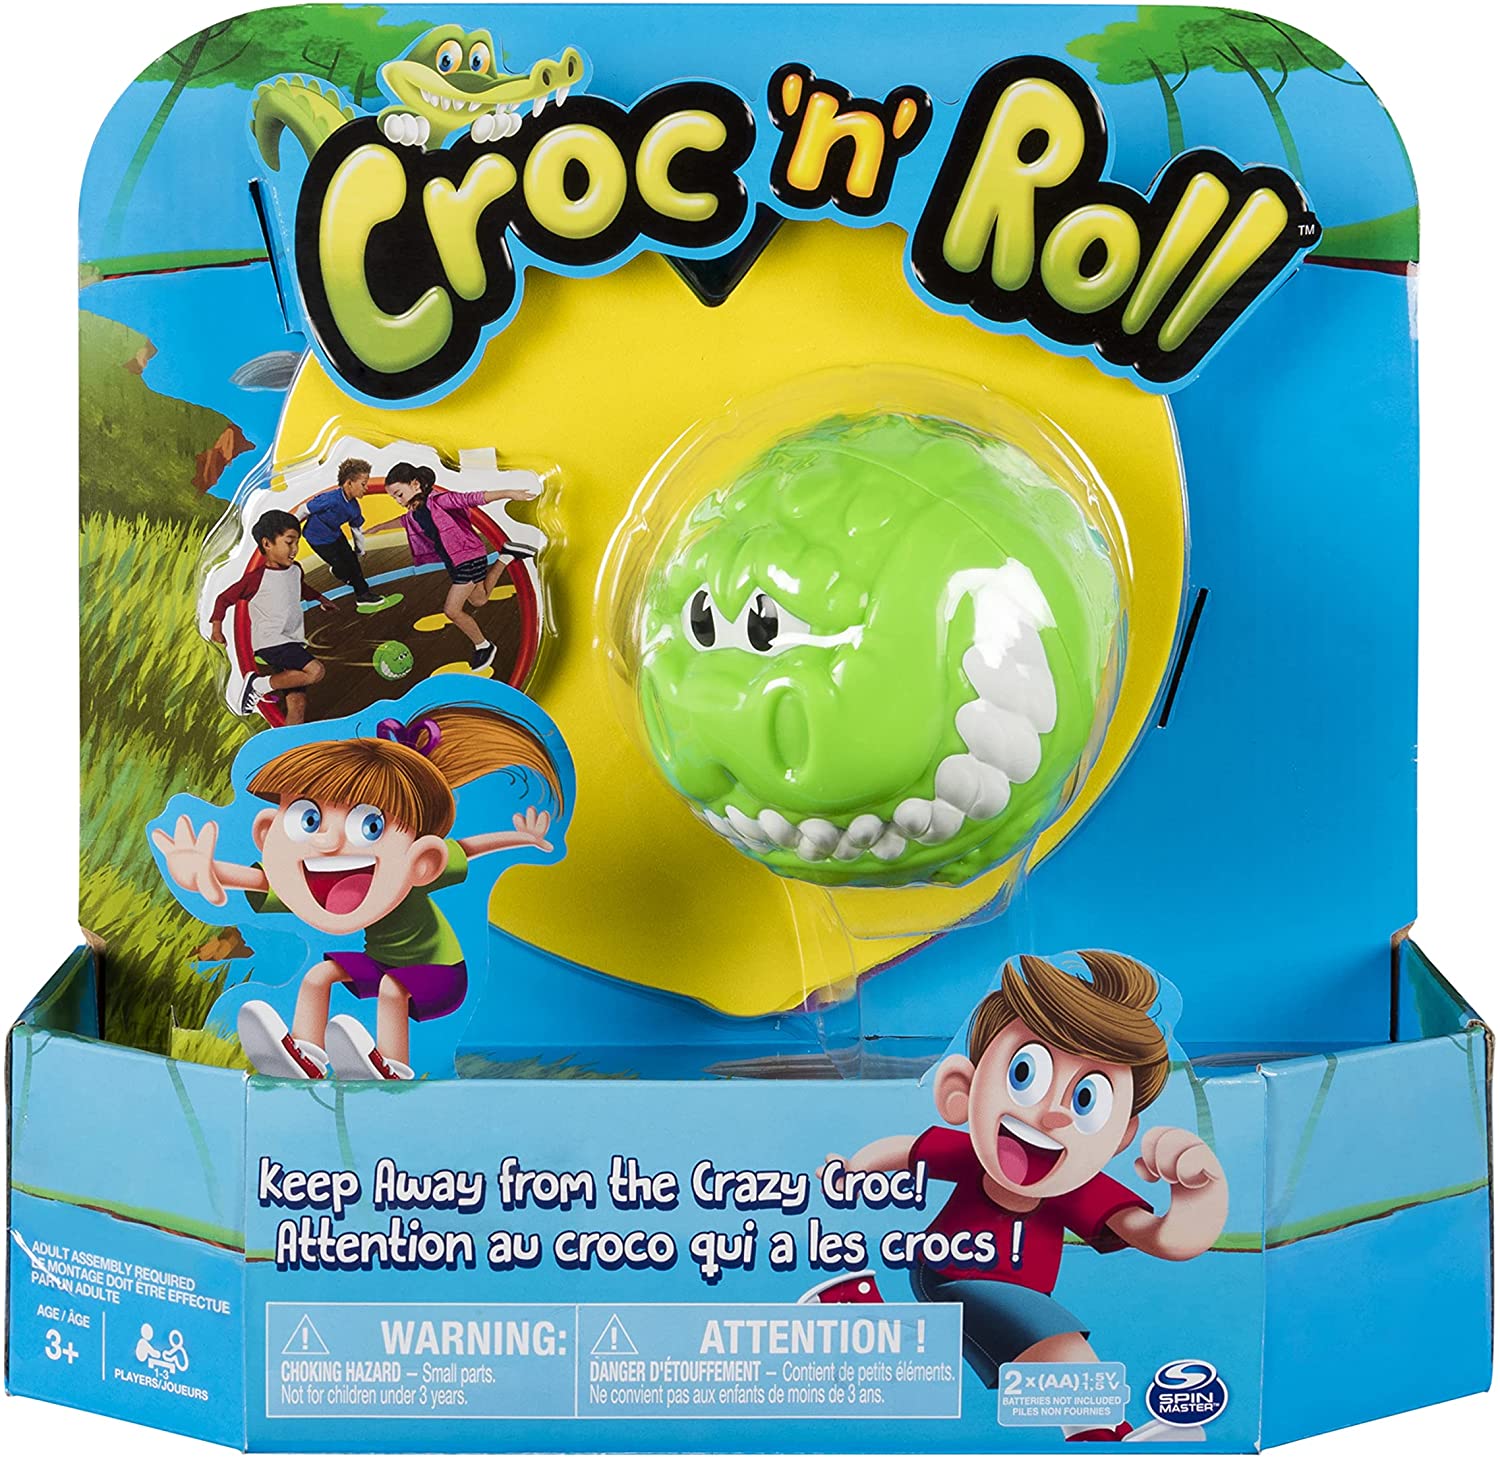 Croc ‘n’ Roll - Fun Family Game for Kids Aged 3 and Up 